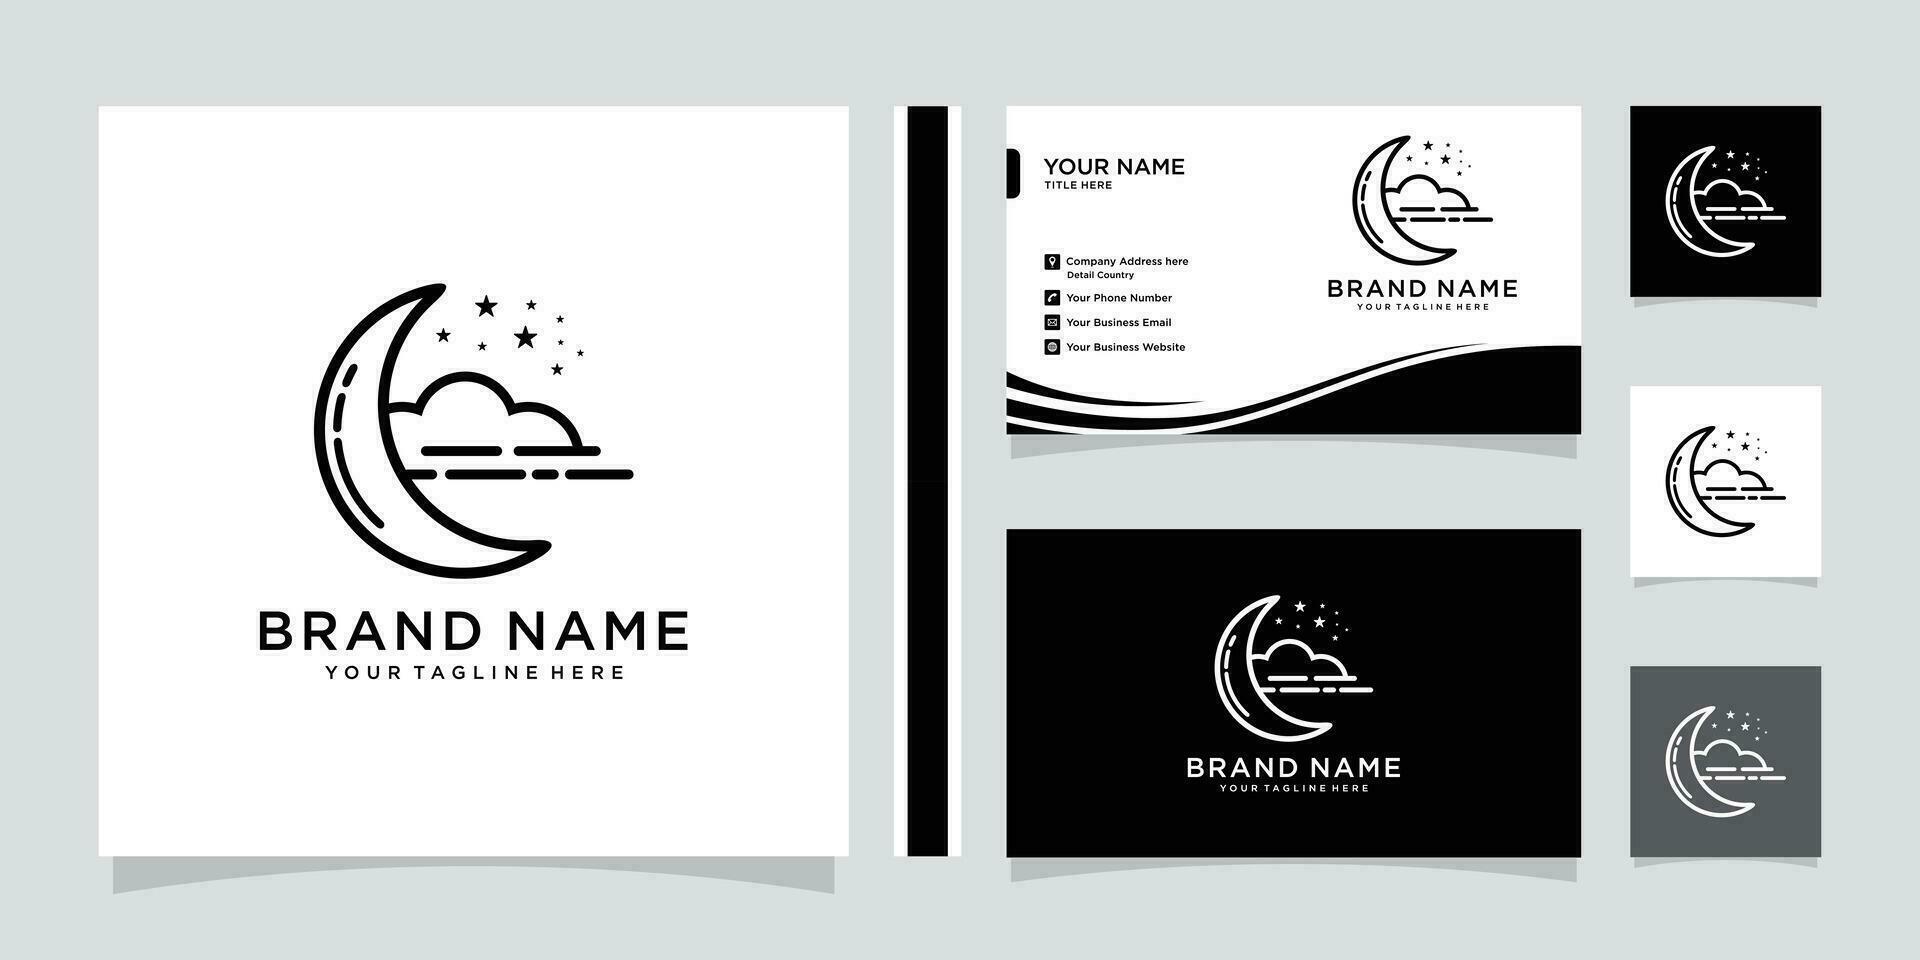 night icon moon cloud and star vector with business card design.